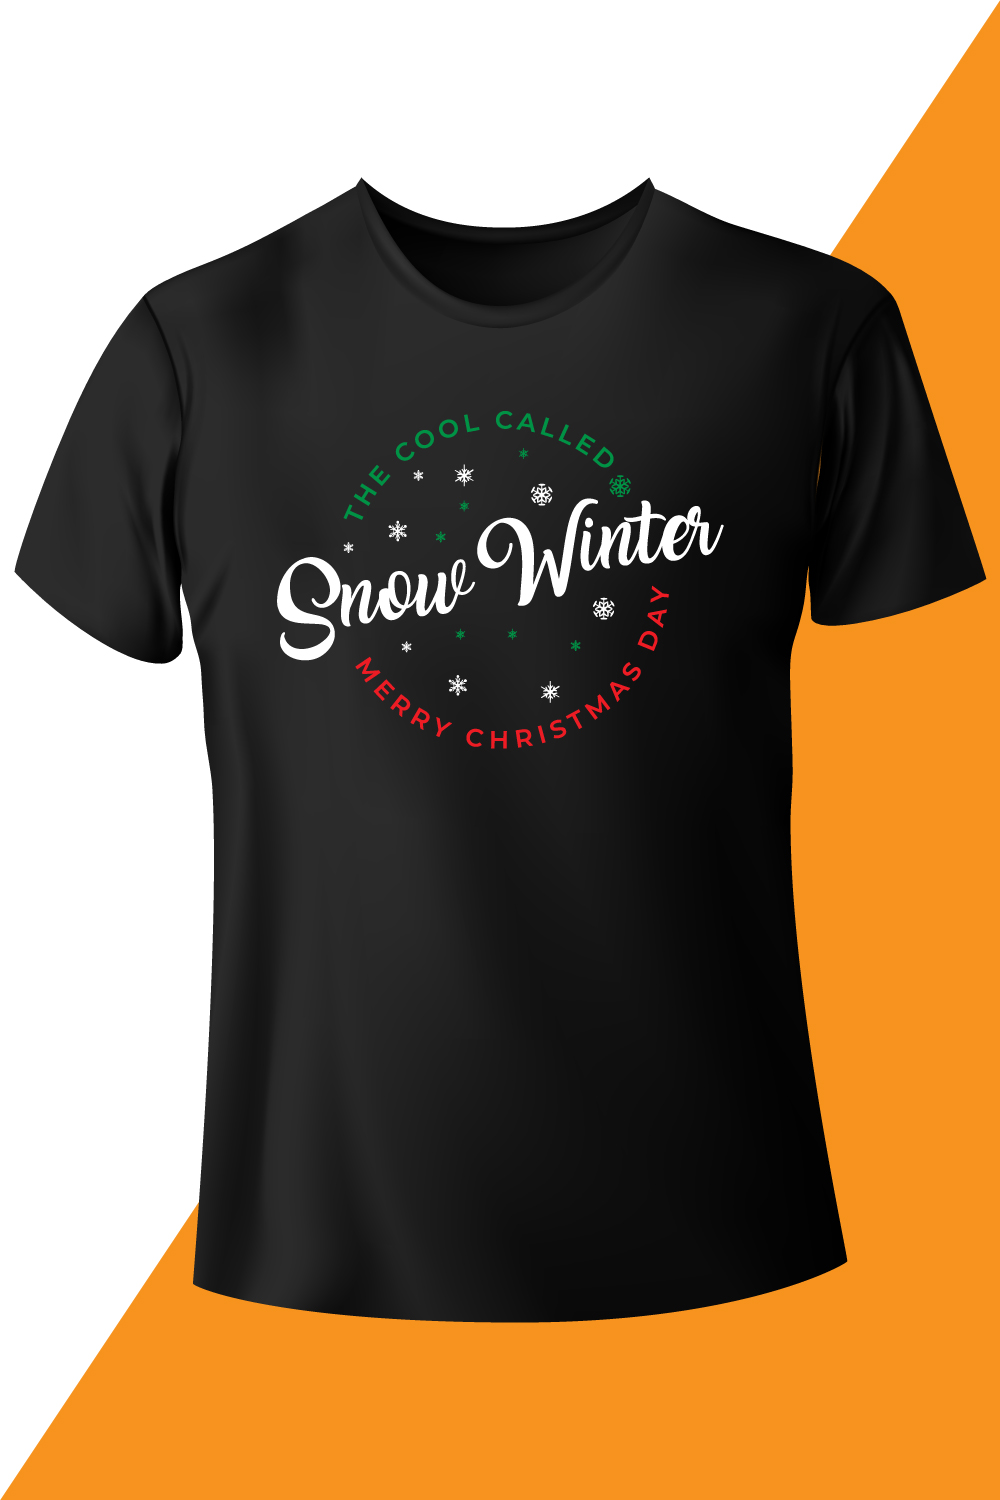 Image of a black t-shirt with an exquisite print on the theme of Merry Christmas.